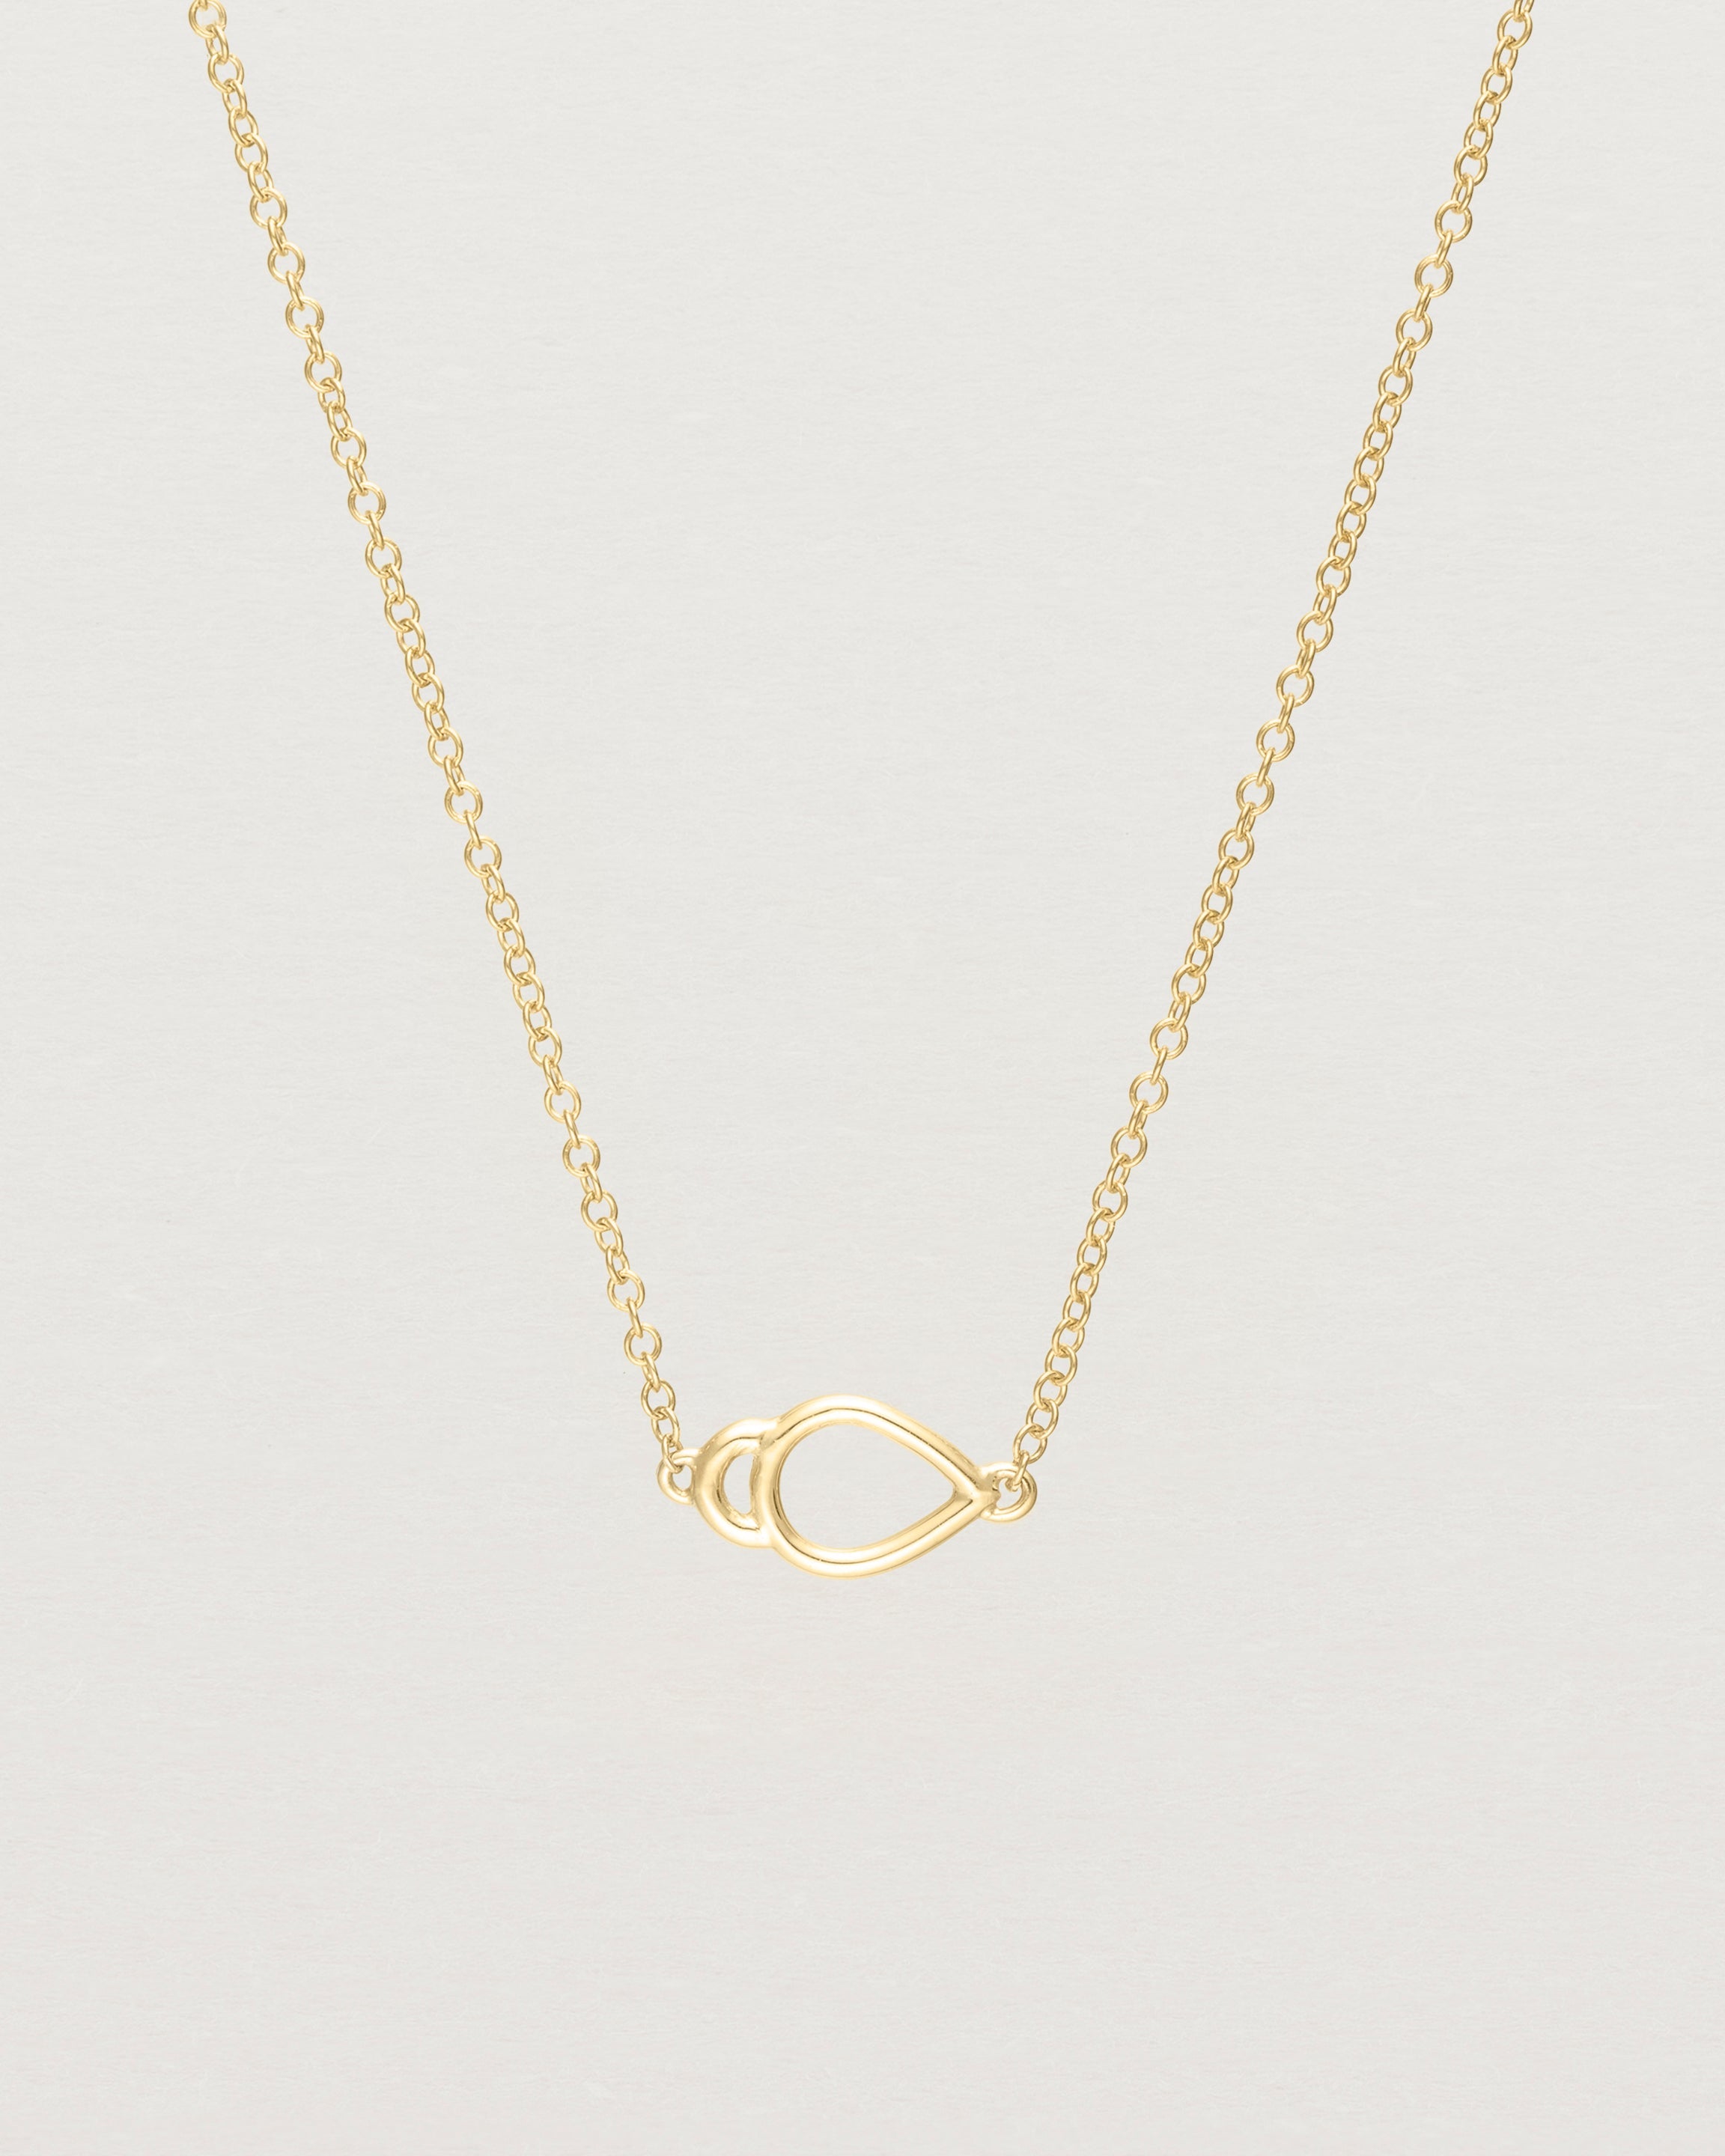 Close up of the Oana Necklace in Yellow Gold.